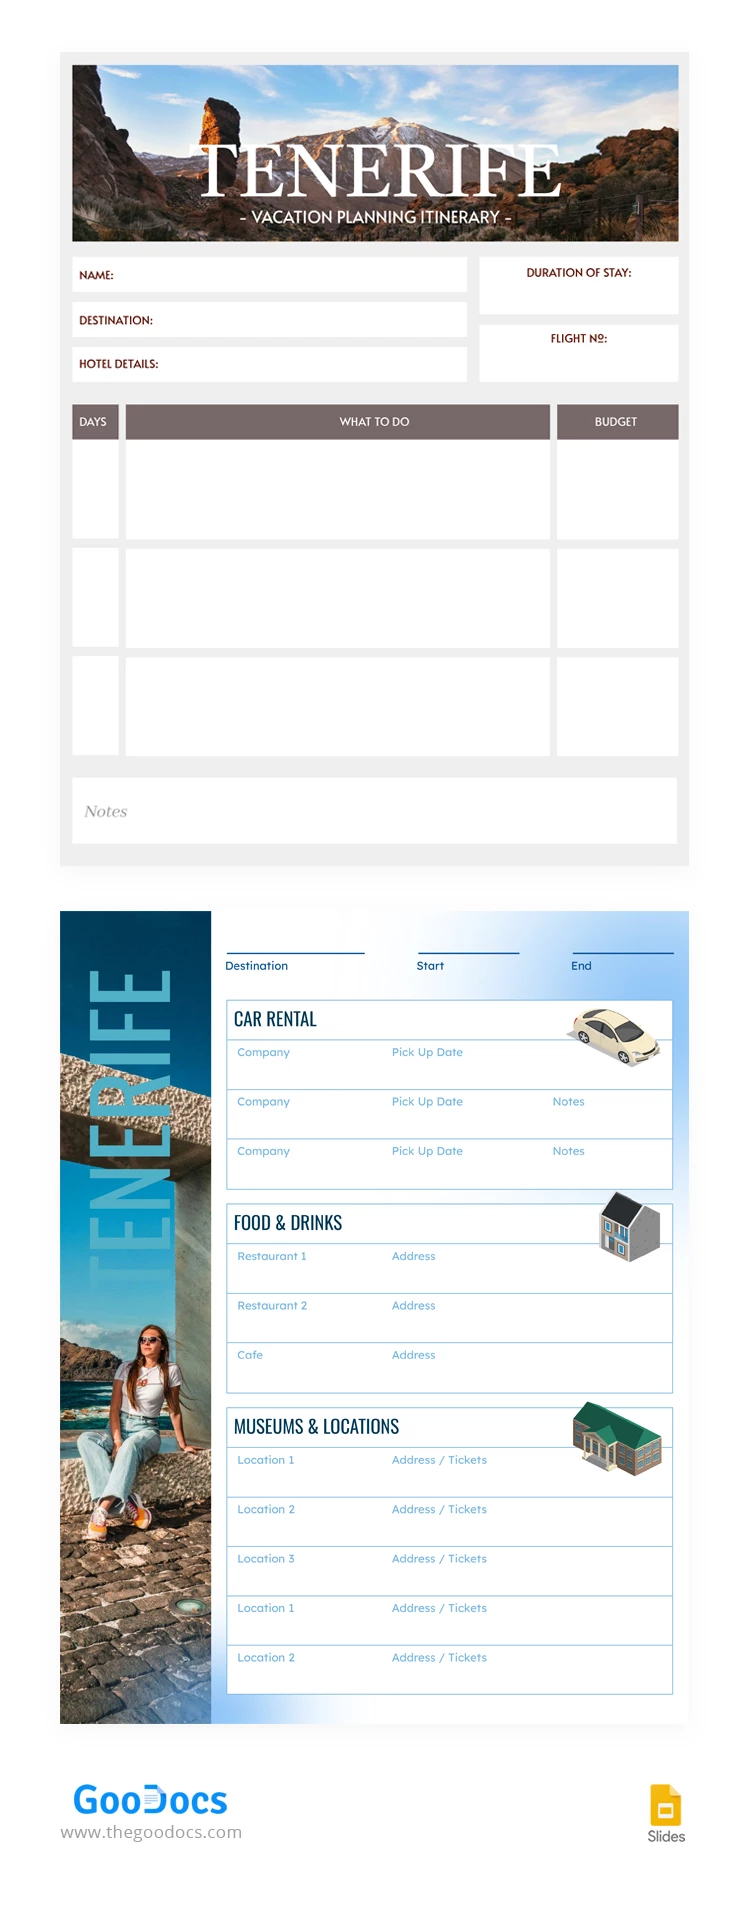 Vacation Planning Itinerary - free Google Docs Template - 10068516